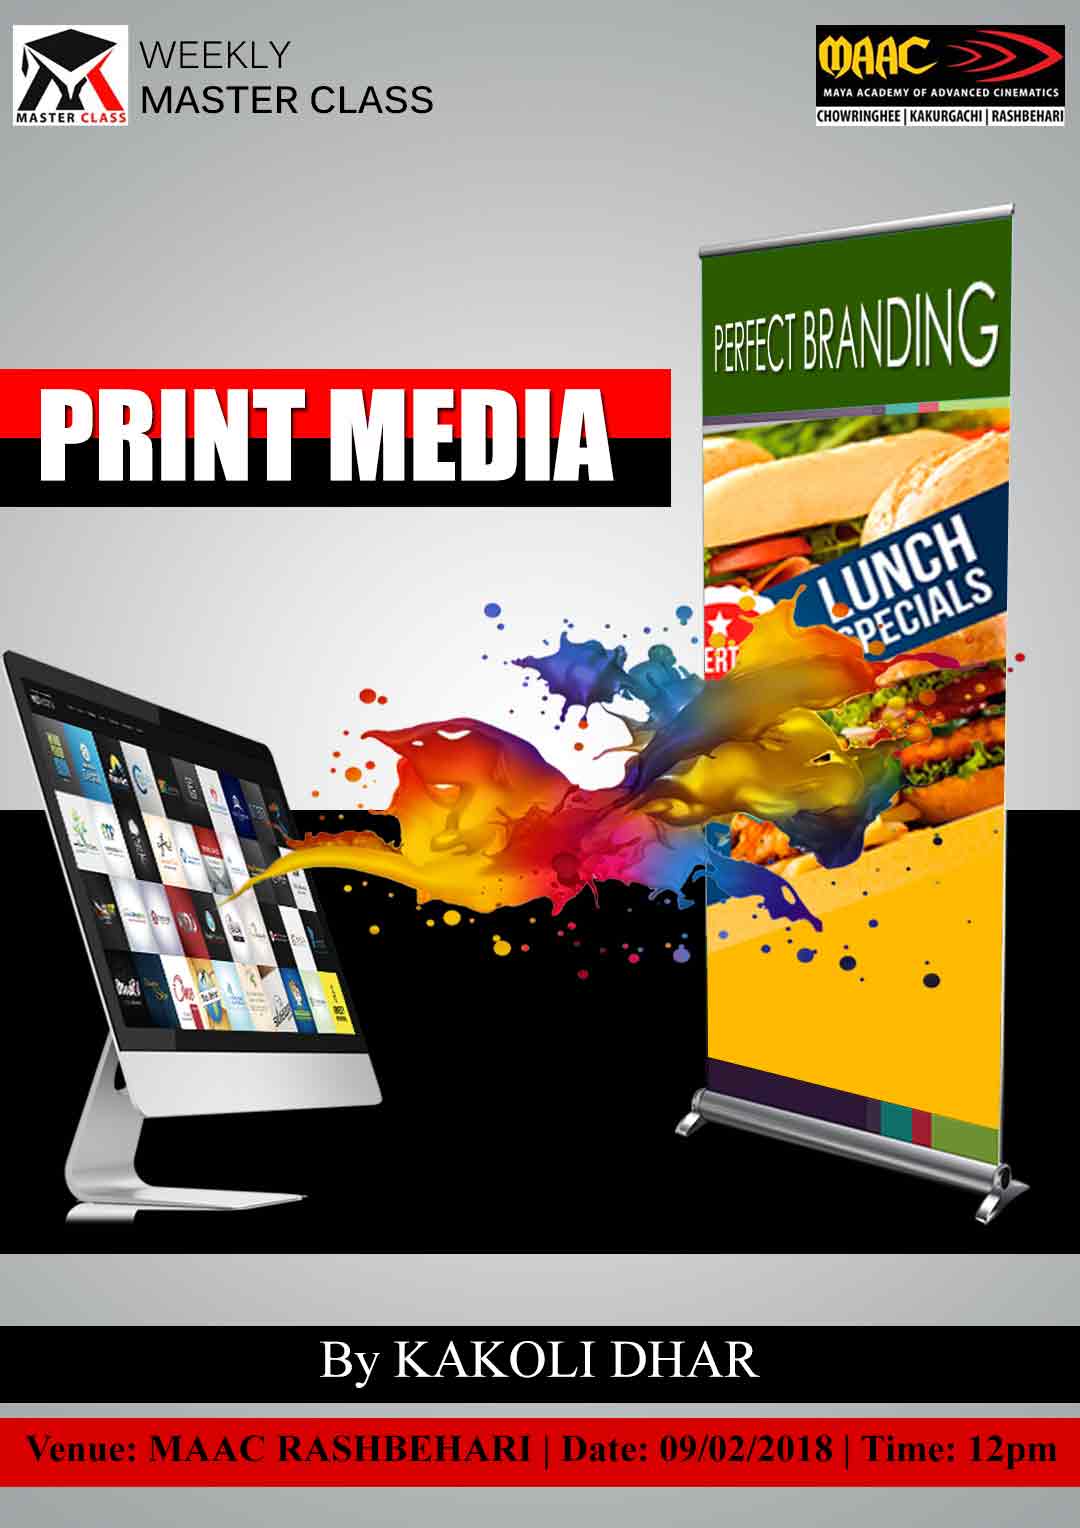 Weekly Master Class on Print Media